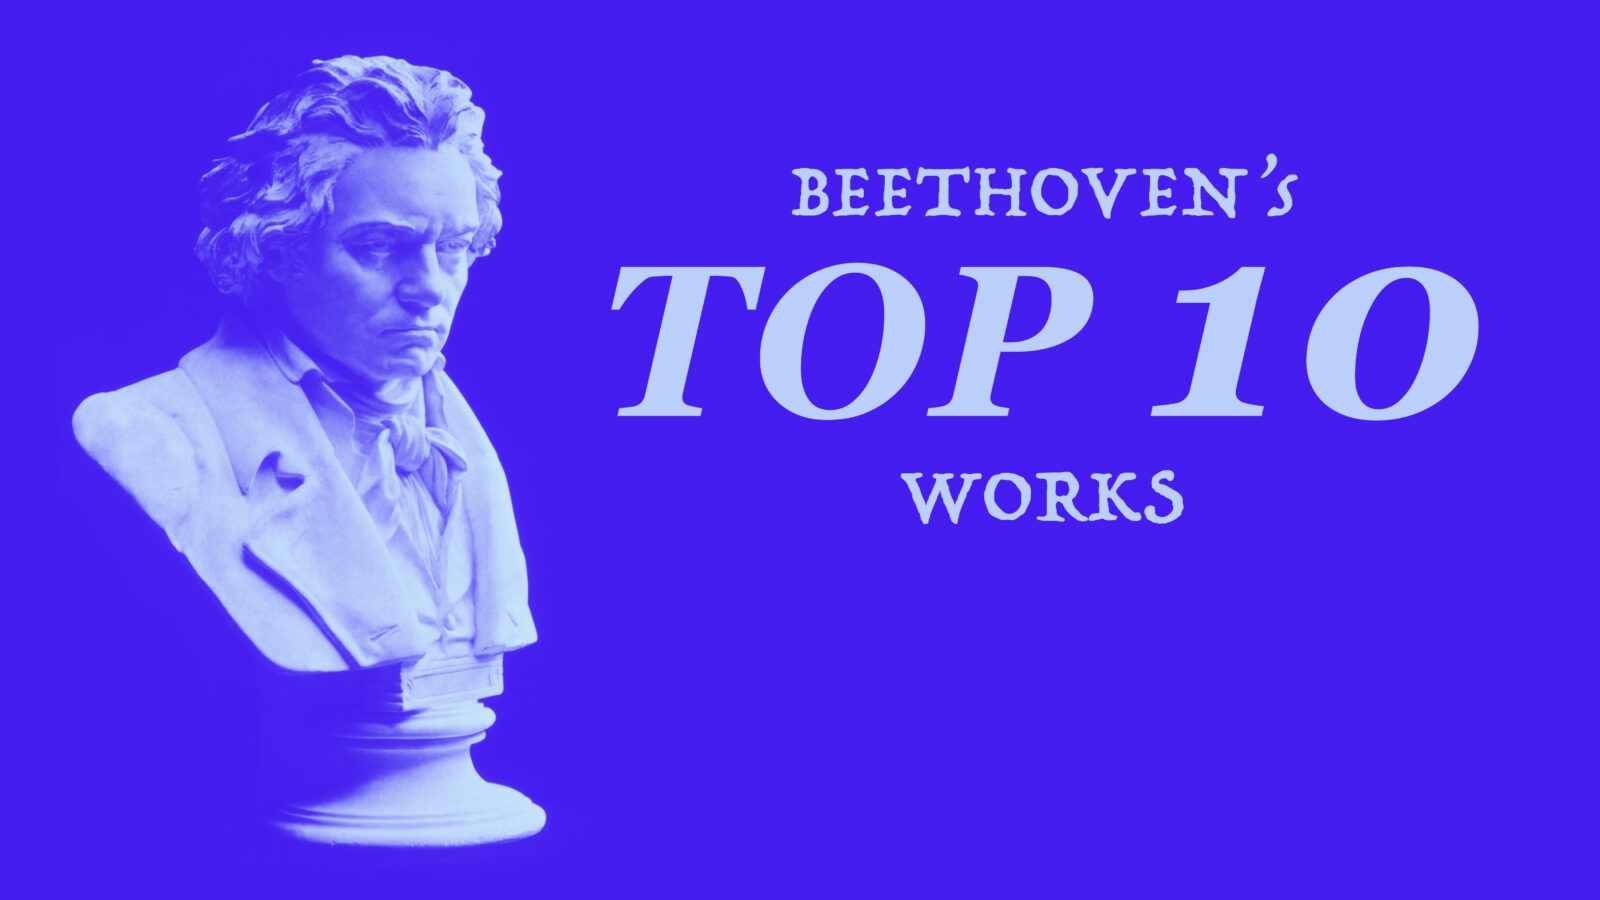 Featured image for “Beethoven’s Top 10 Works”